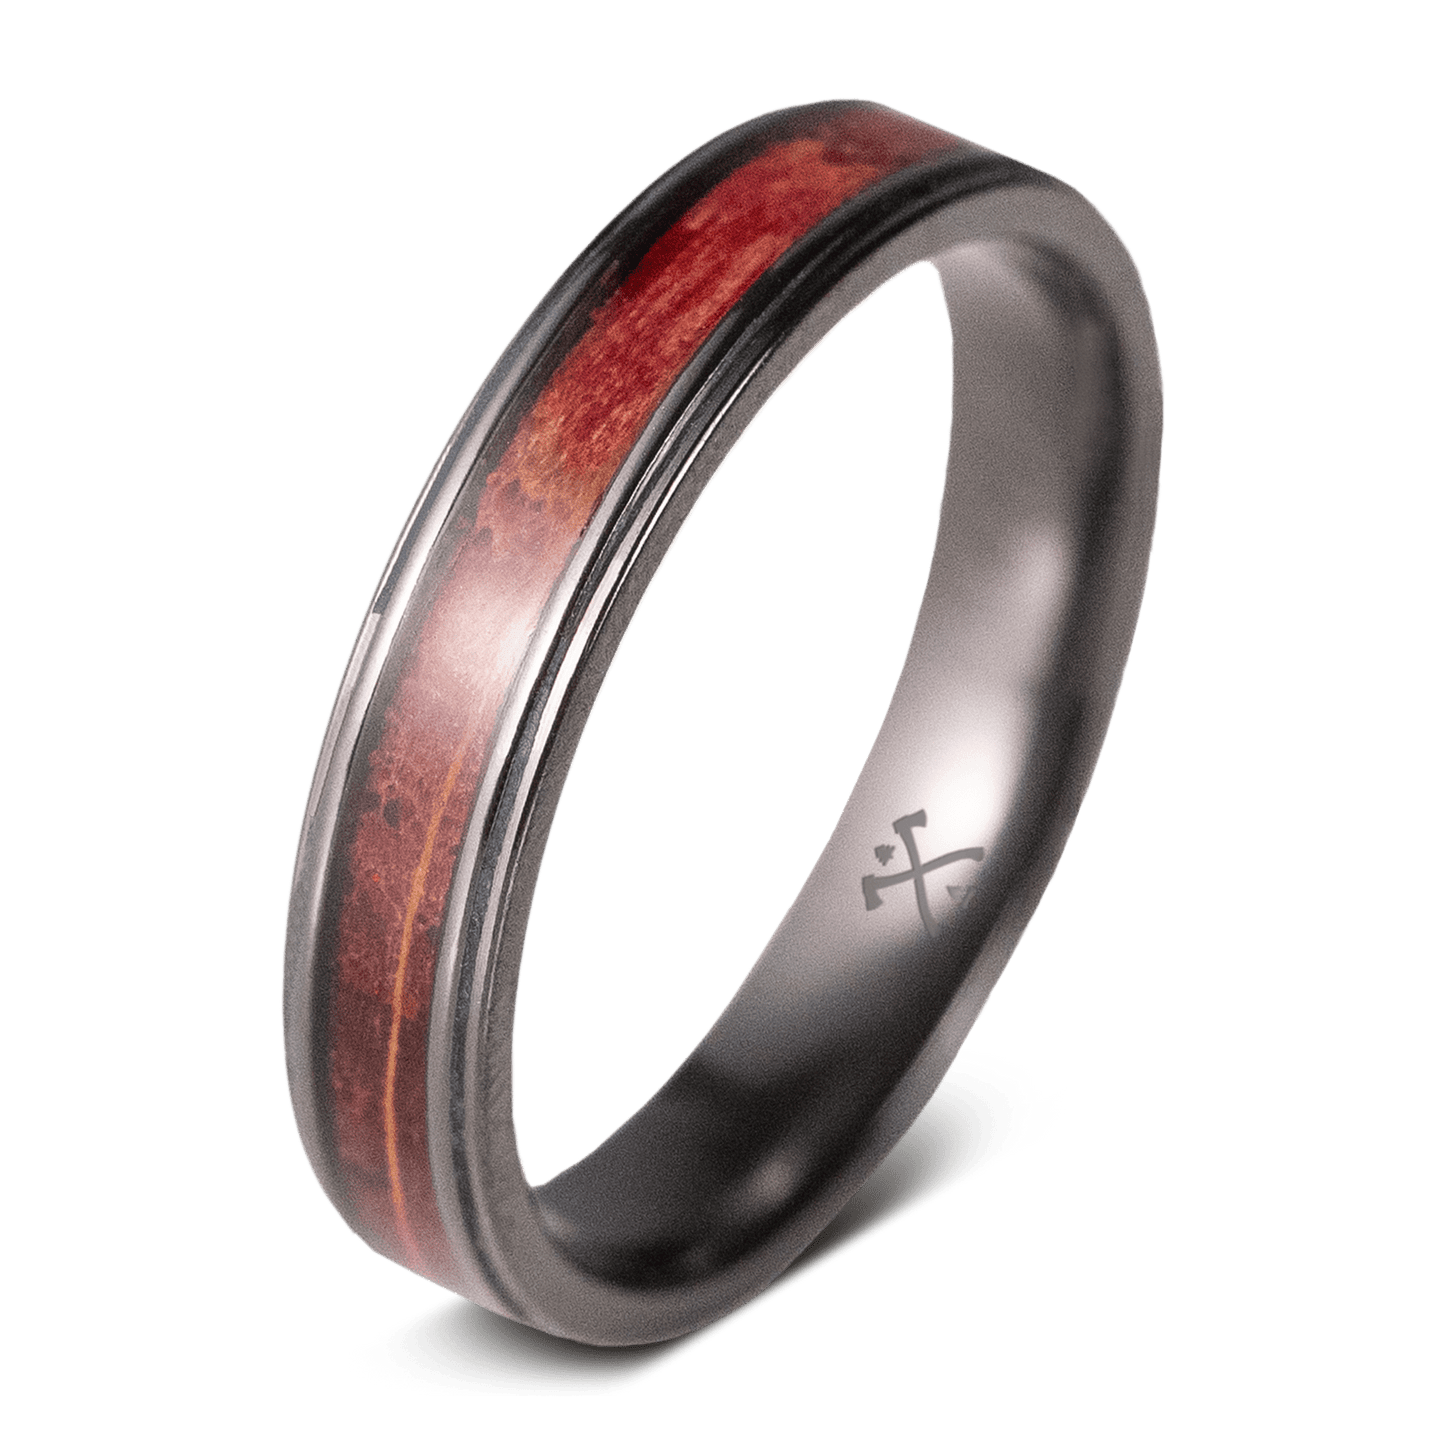 The Hannah - Men's Wedding Rings - Manly Bands